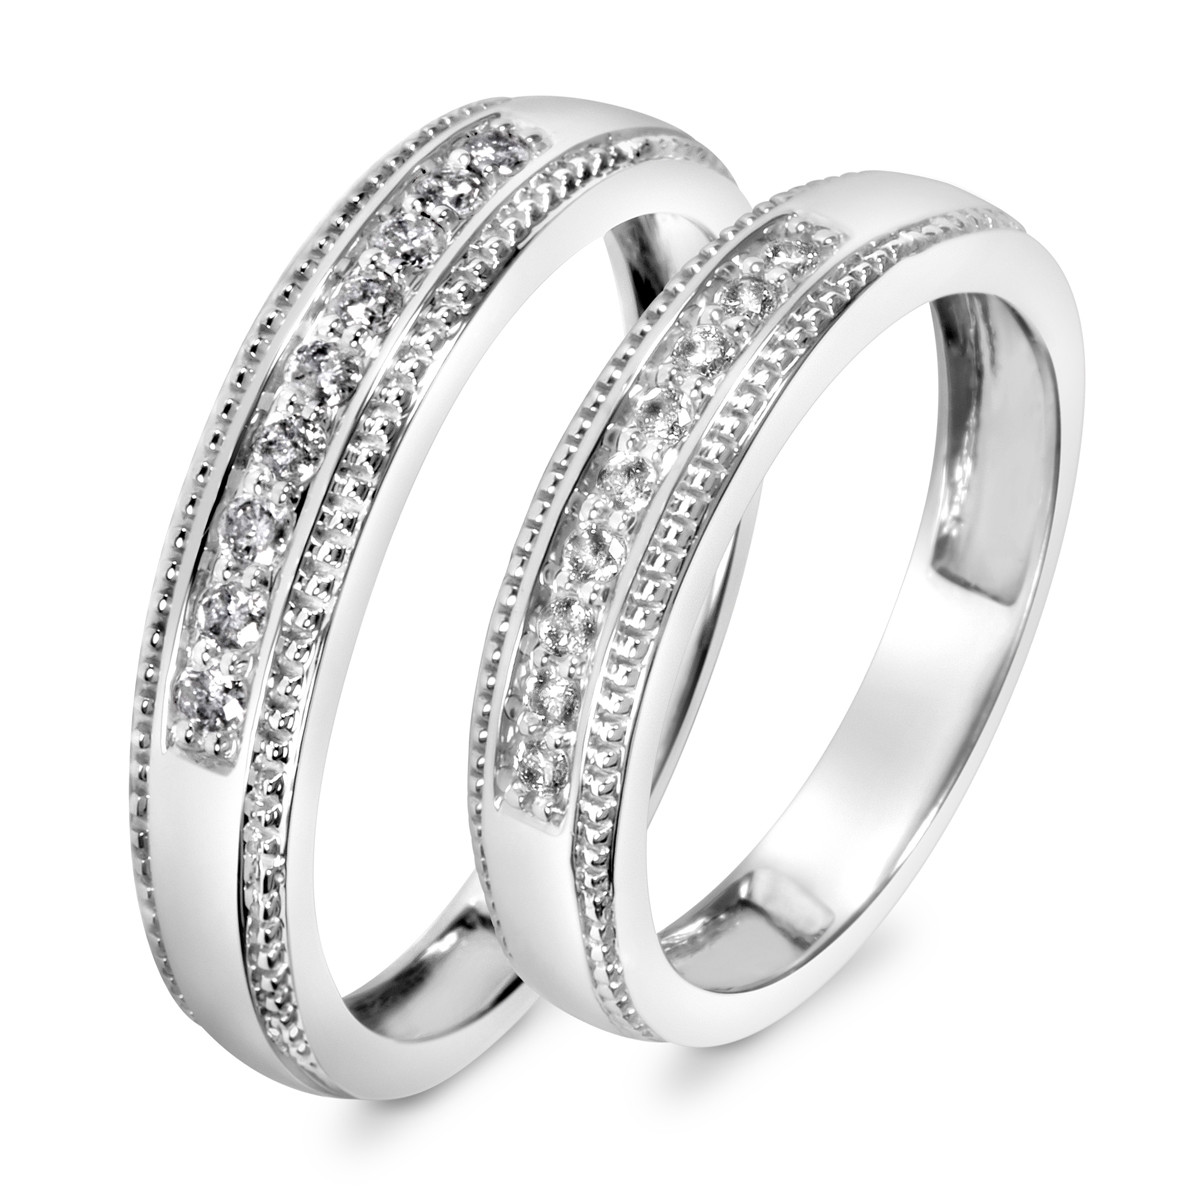 Wedding Band Sets His And Hers
 1 3 CT T W Diamond His And Hers Wedding Band Set 10K